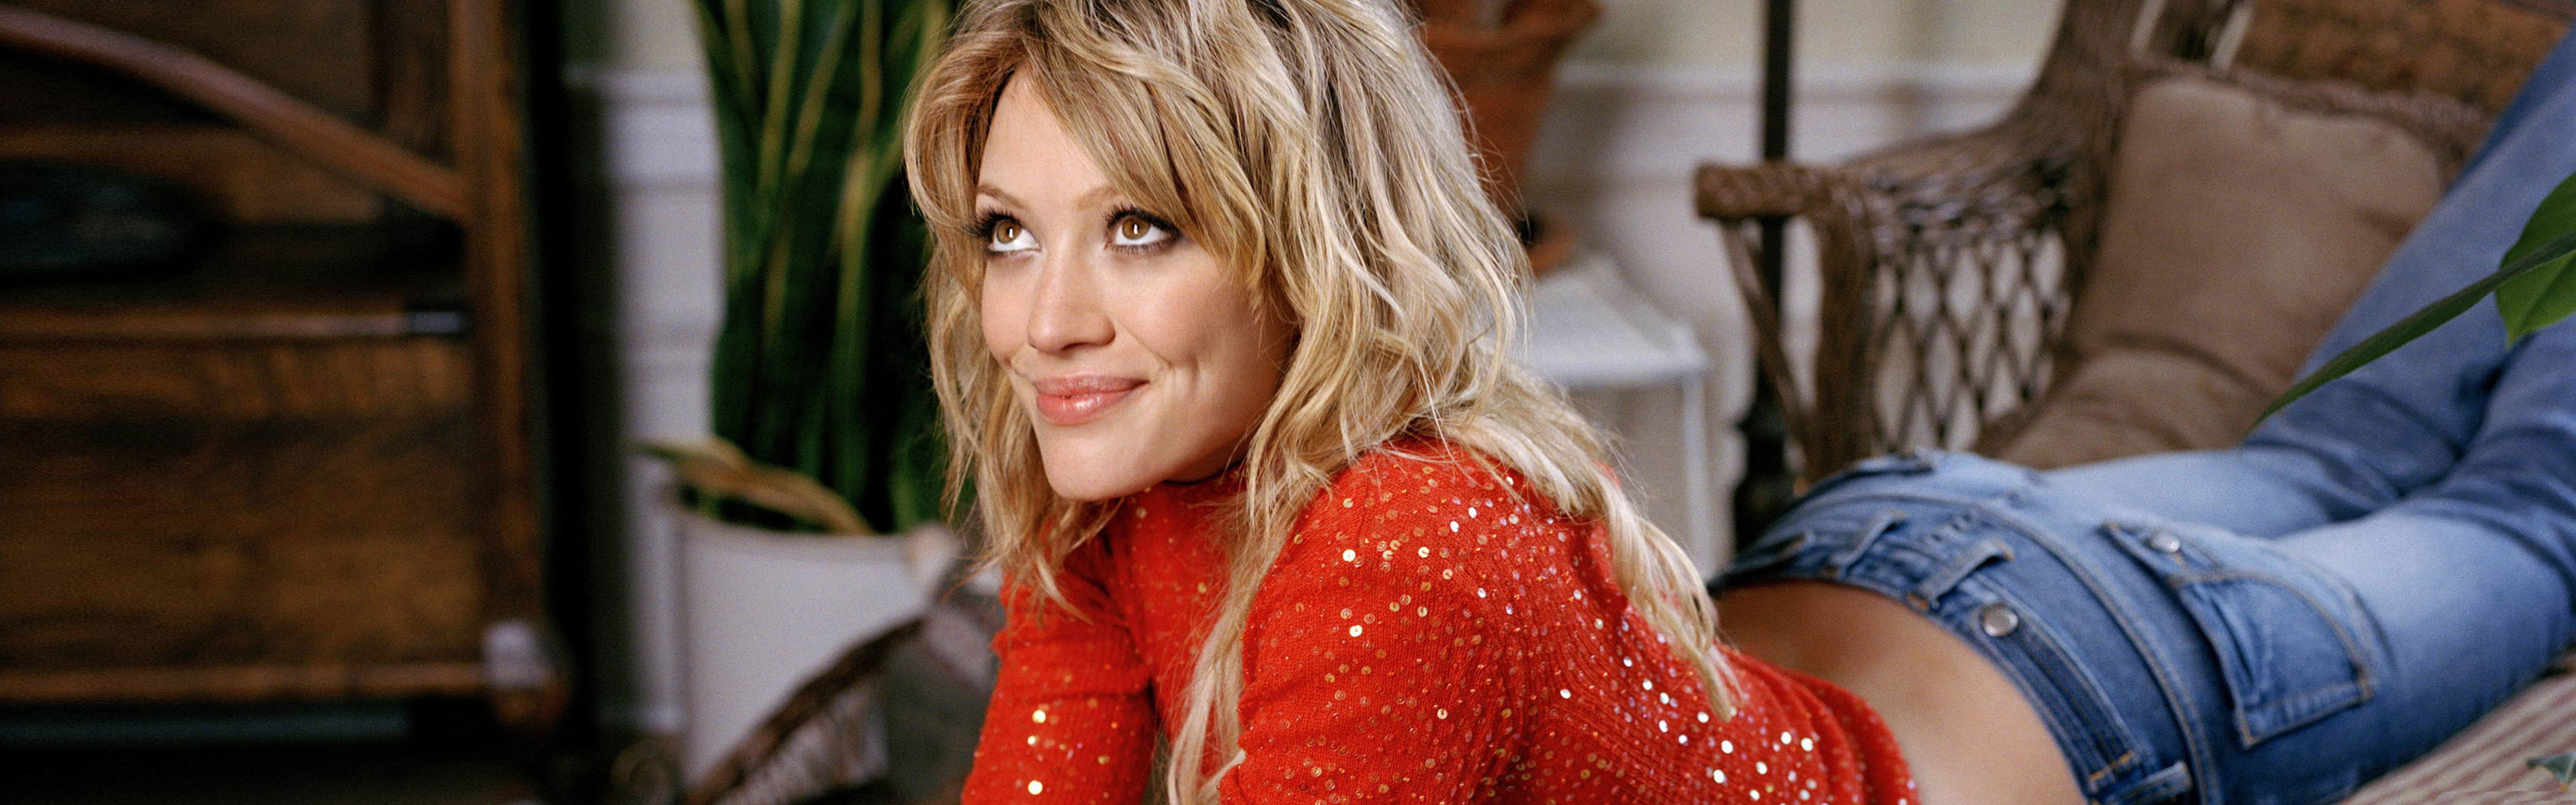 Download dual monitor 3360x1050 Hilary Duff PC background ID:347855 for free